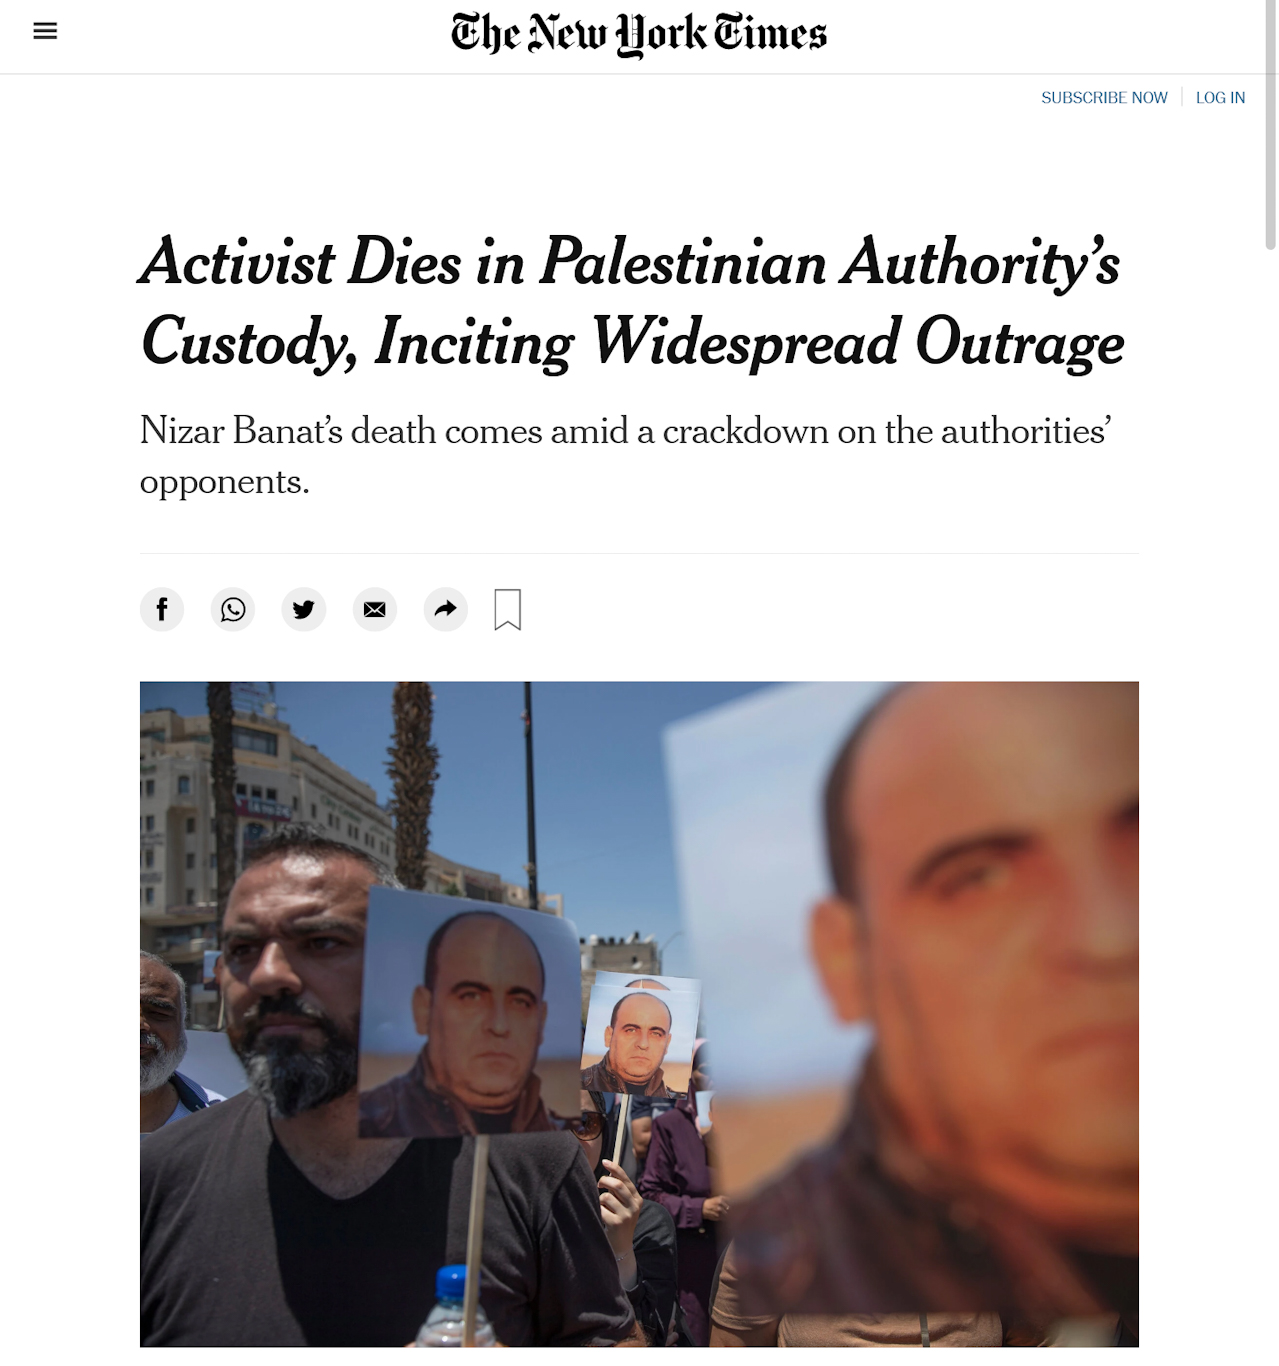 A staunch defender of Israel, the NYT was quick to denounce the PA's misdeeds